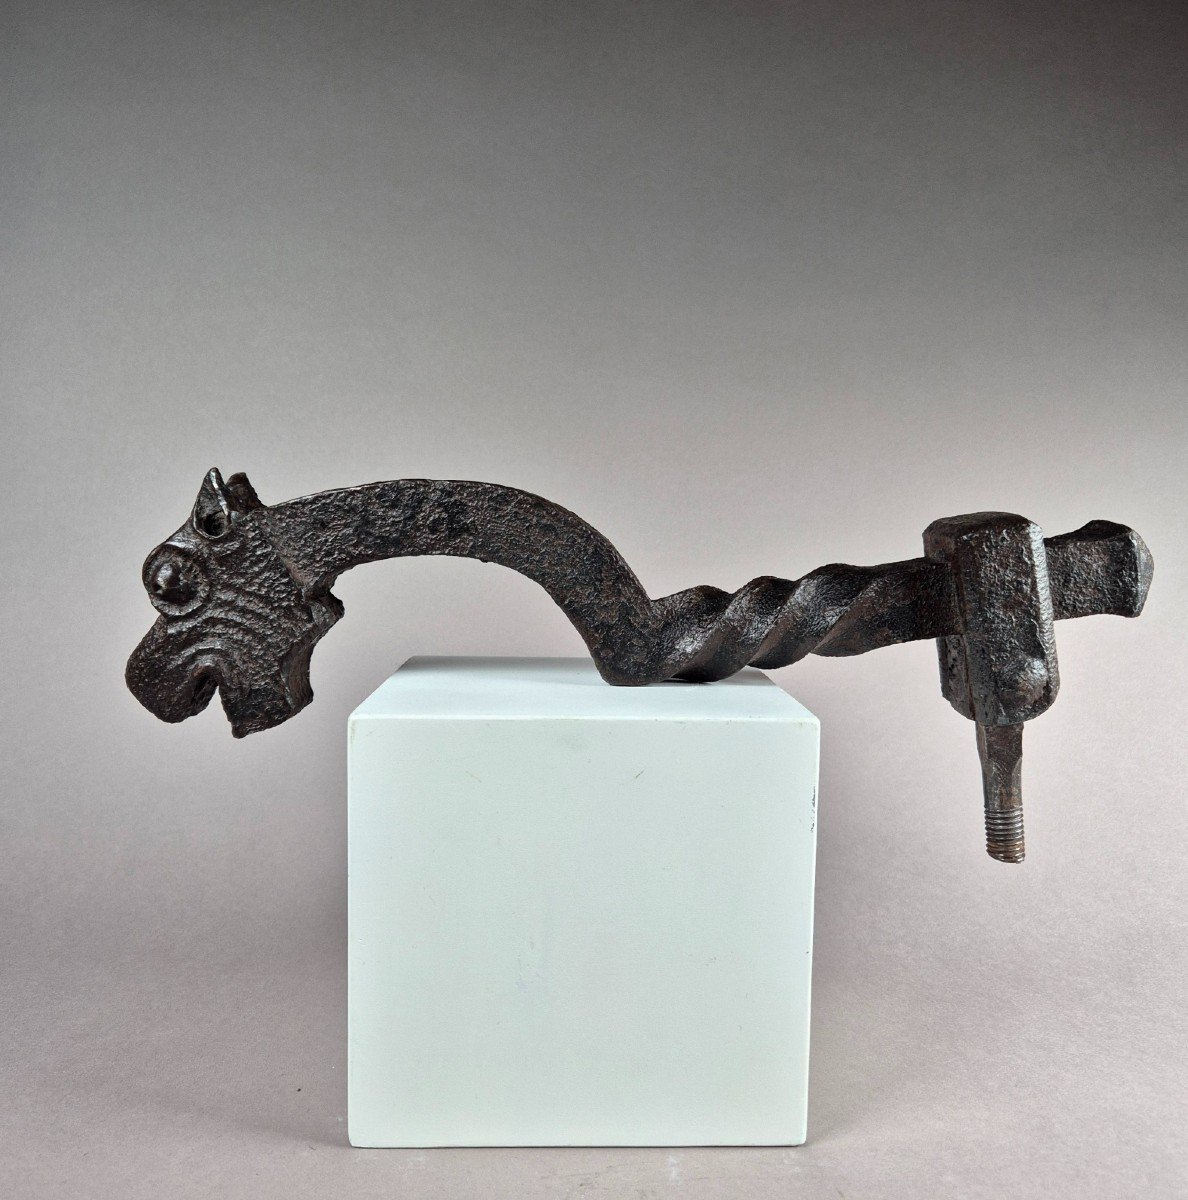 Wrought Iron Door Knocker In The Shape Of A Dragon, 17th Century-photo-3